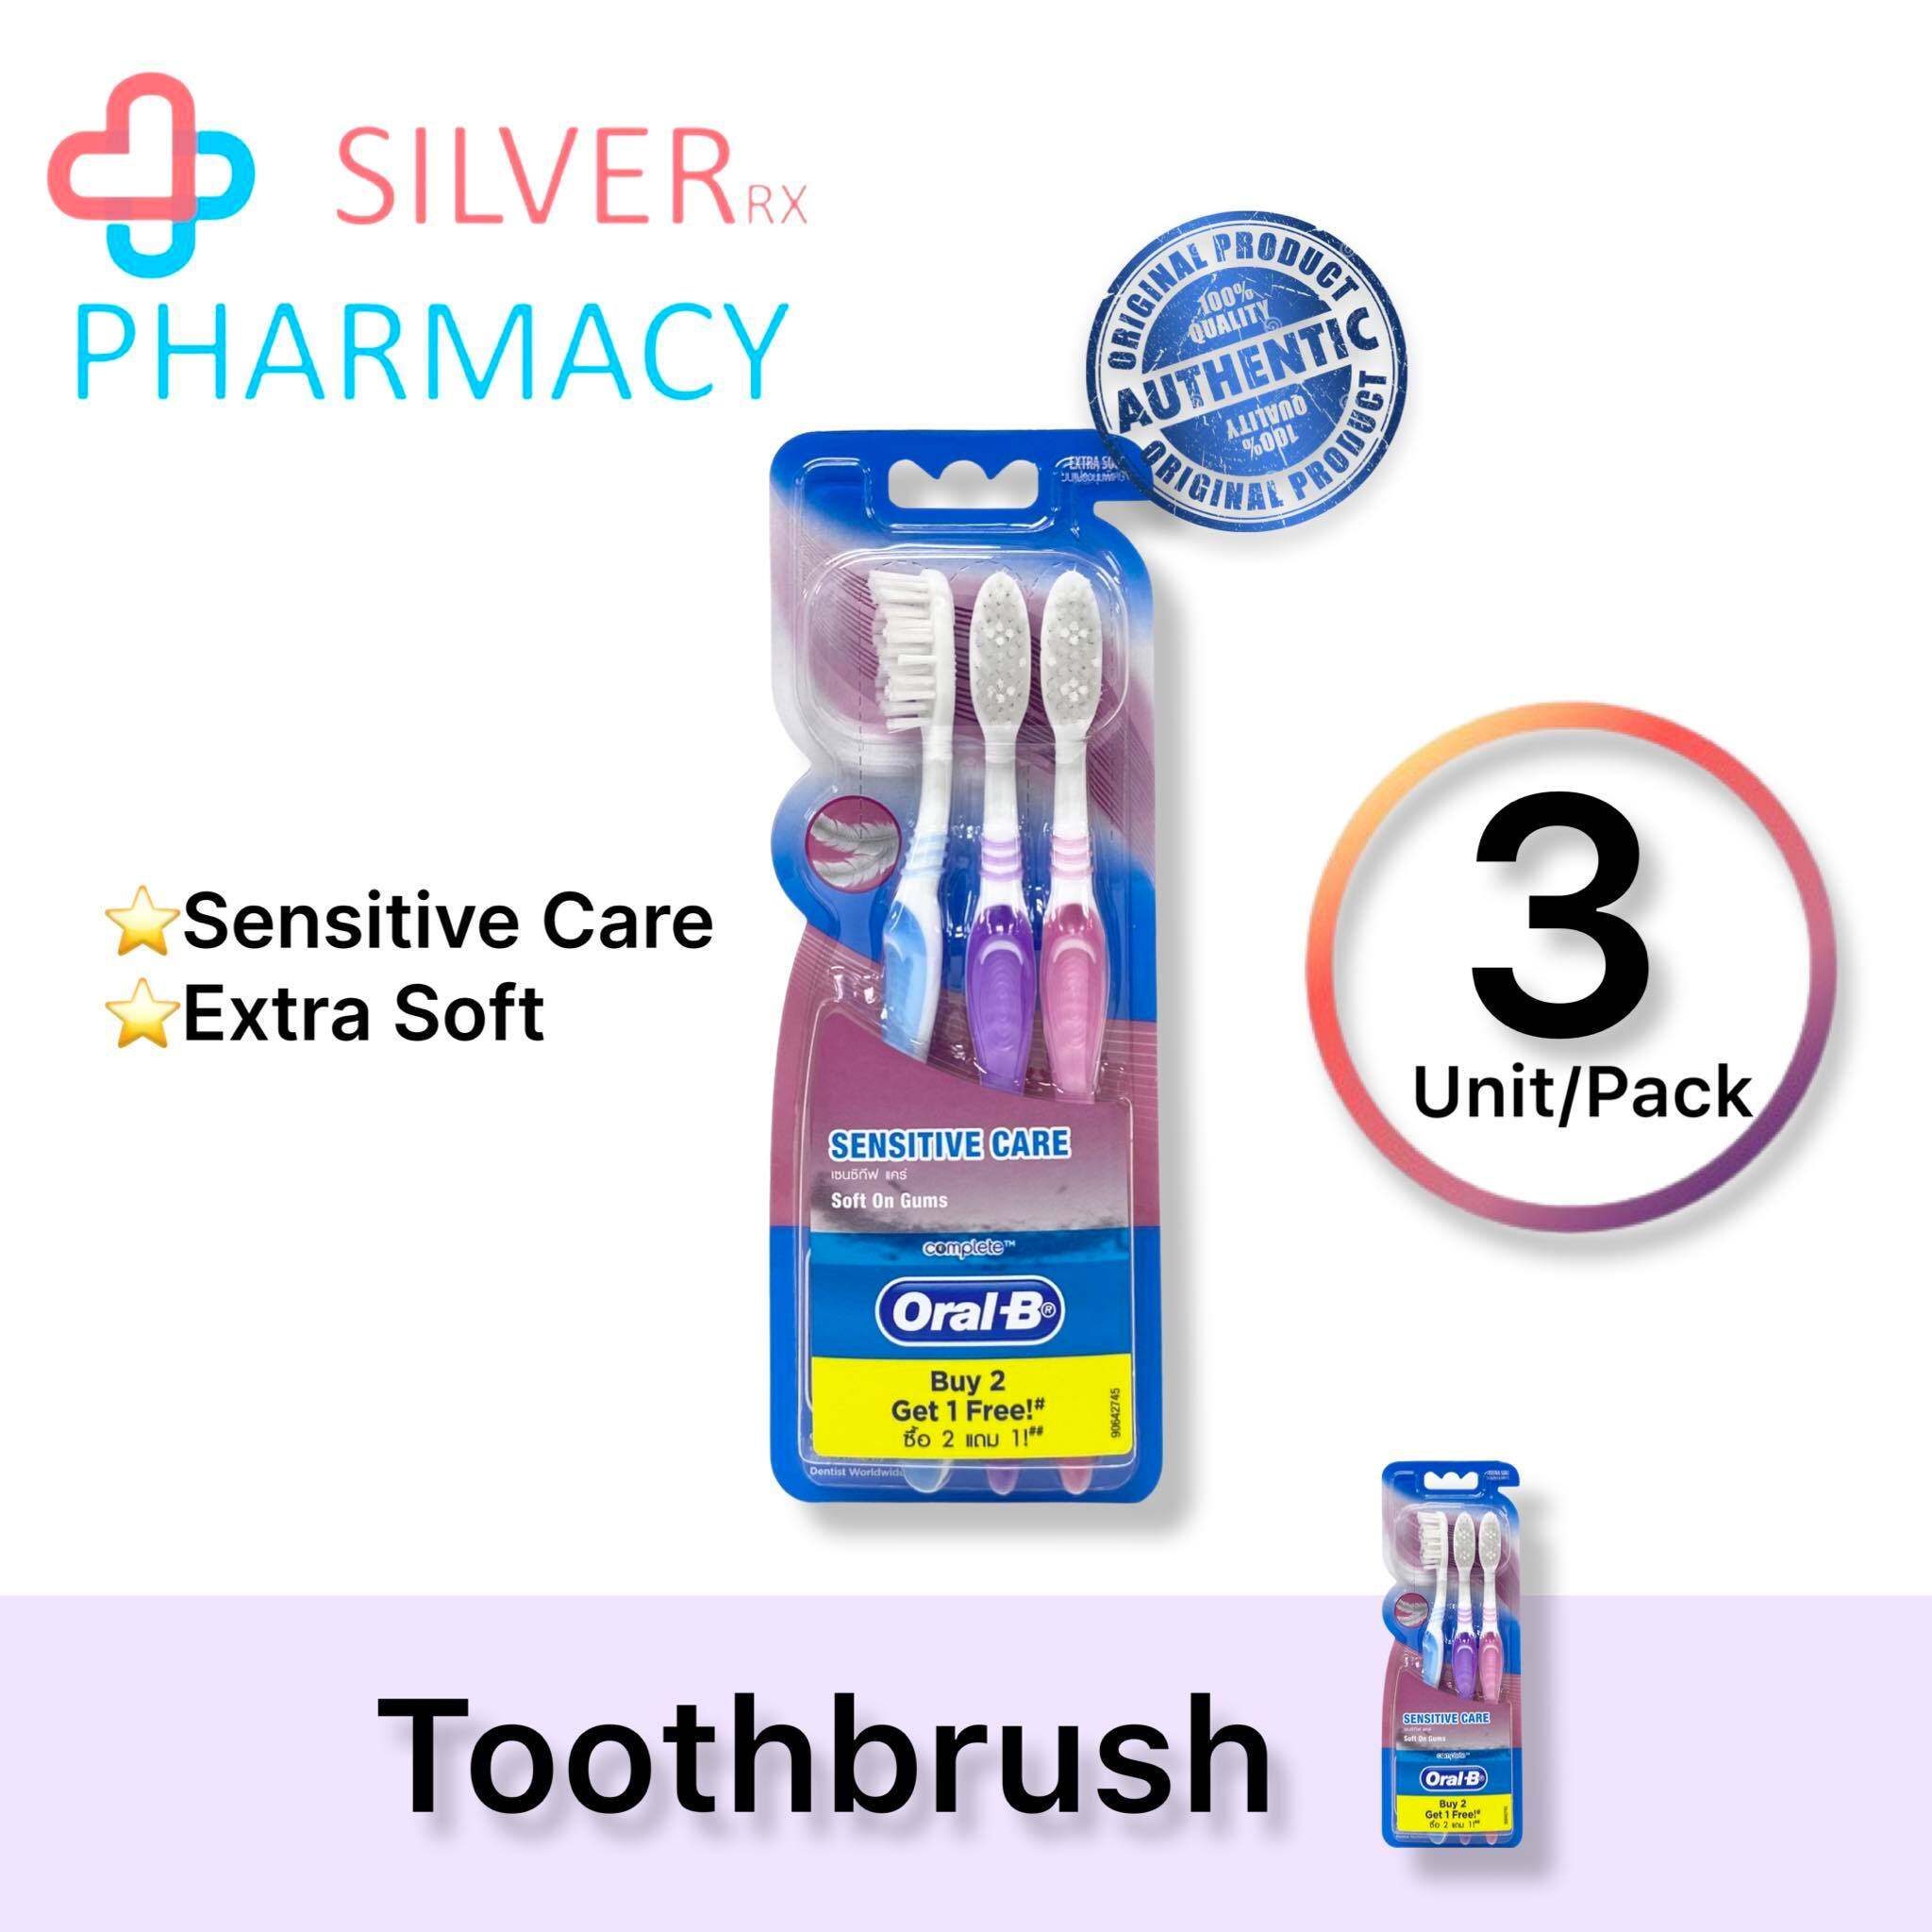 Oral-B Sensitive Care Extra Soft Toothbrush/ Oral-B Easy Clean Soft Toothbrush [3 Units/Pack]